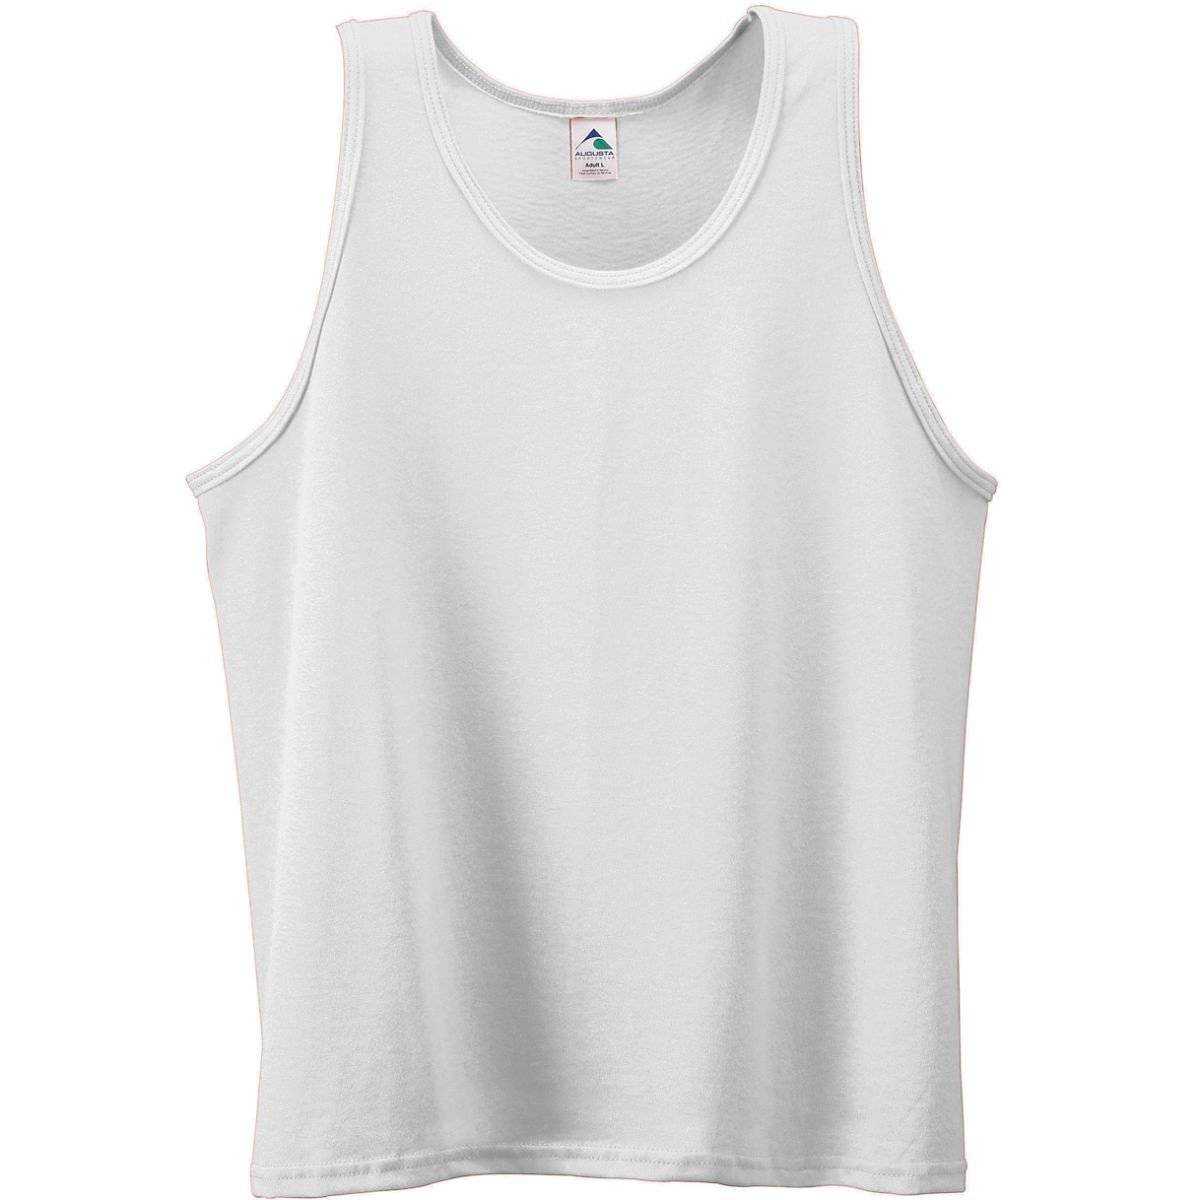 Augusta, Augusta 181 Youth Poly/Cotton Athletic Tank - White